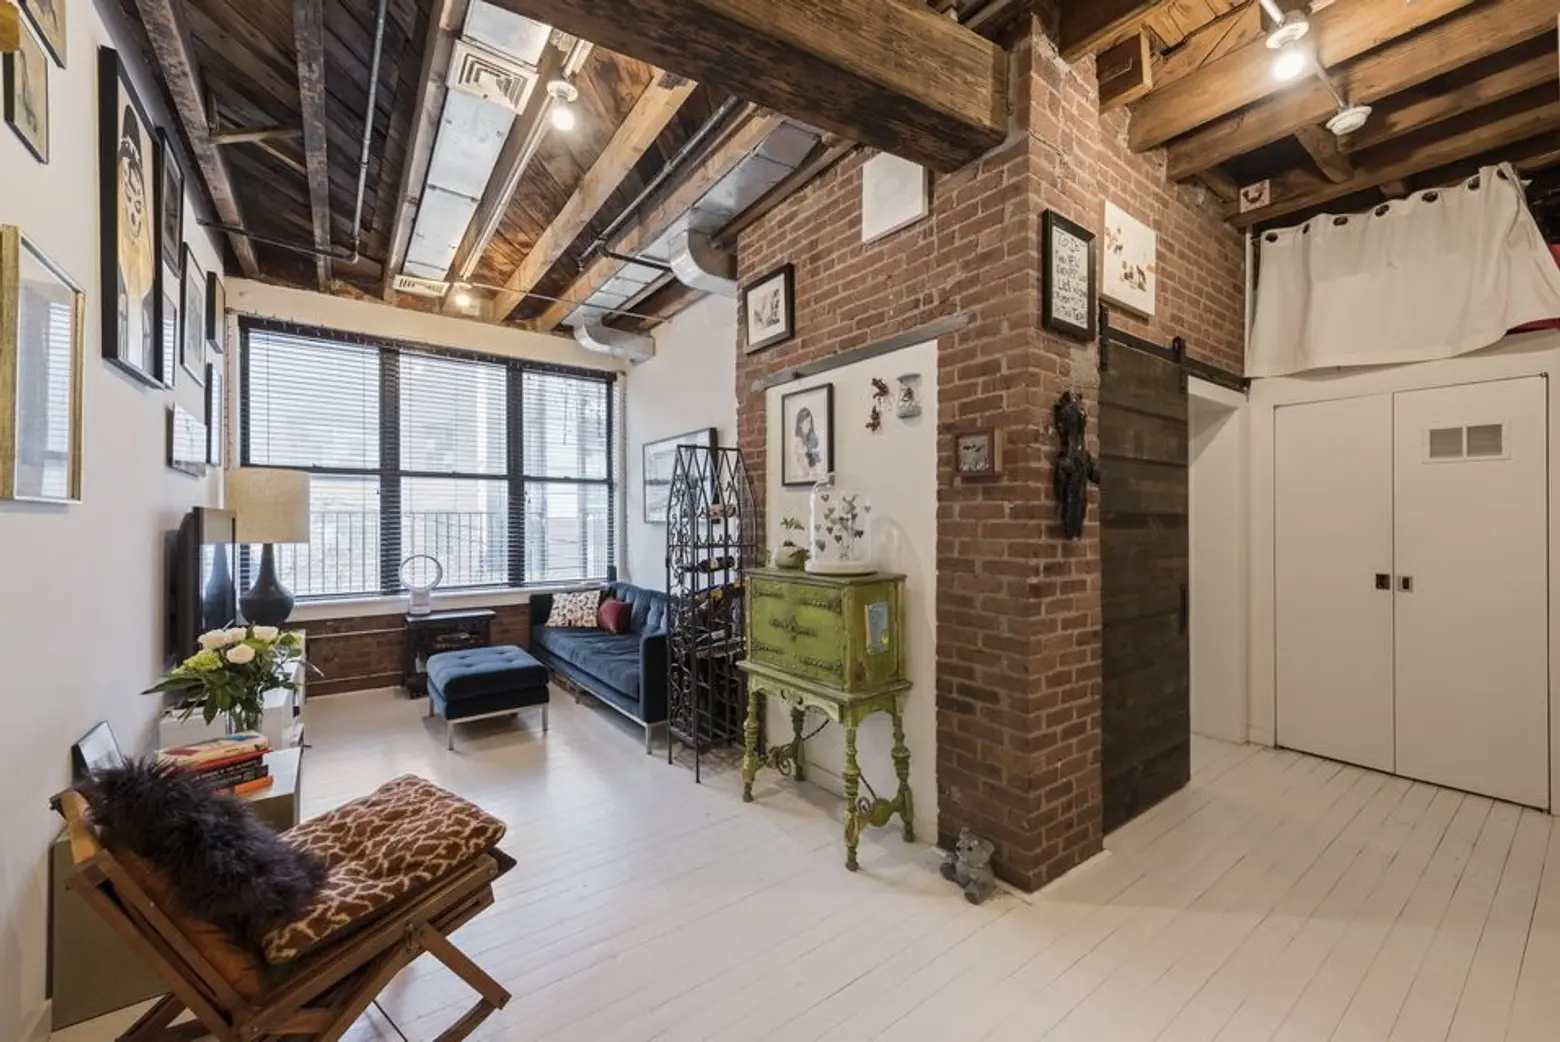 Bakery-turned-condo in Williamsburg holds an incredible apartment lined with exposed brick and beams